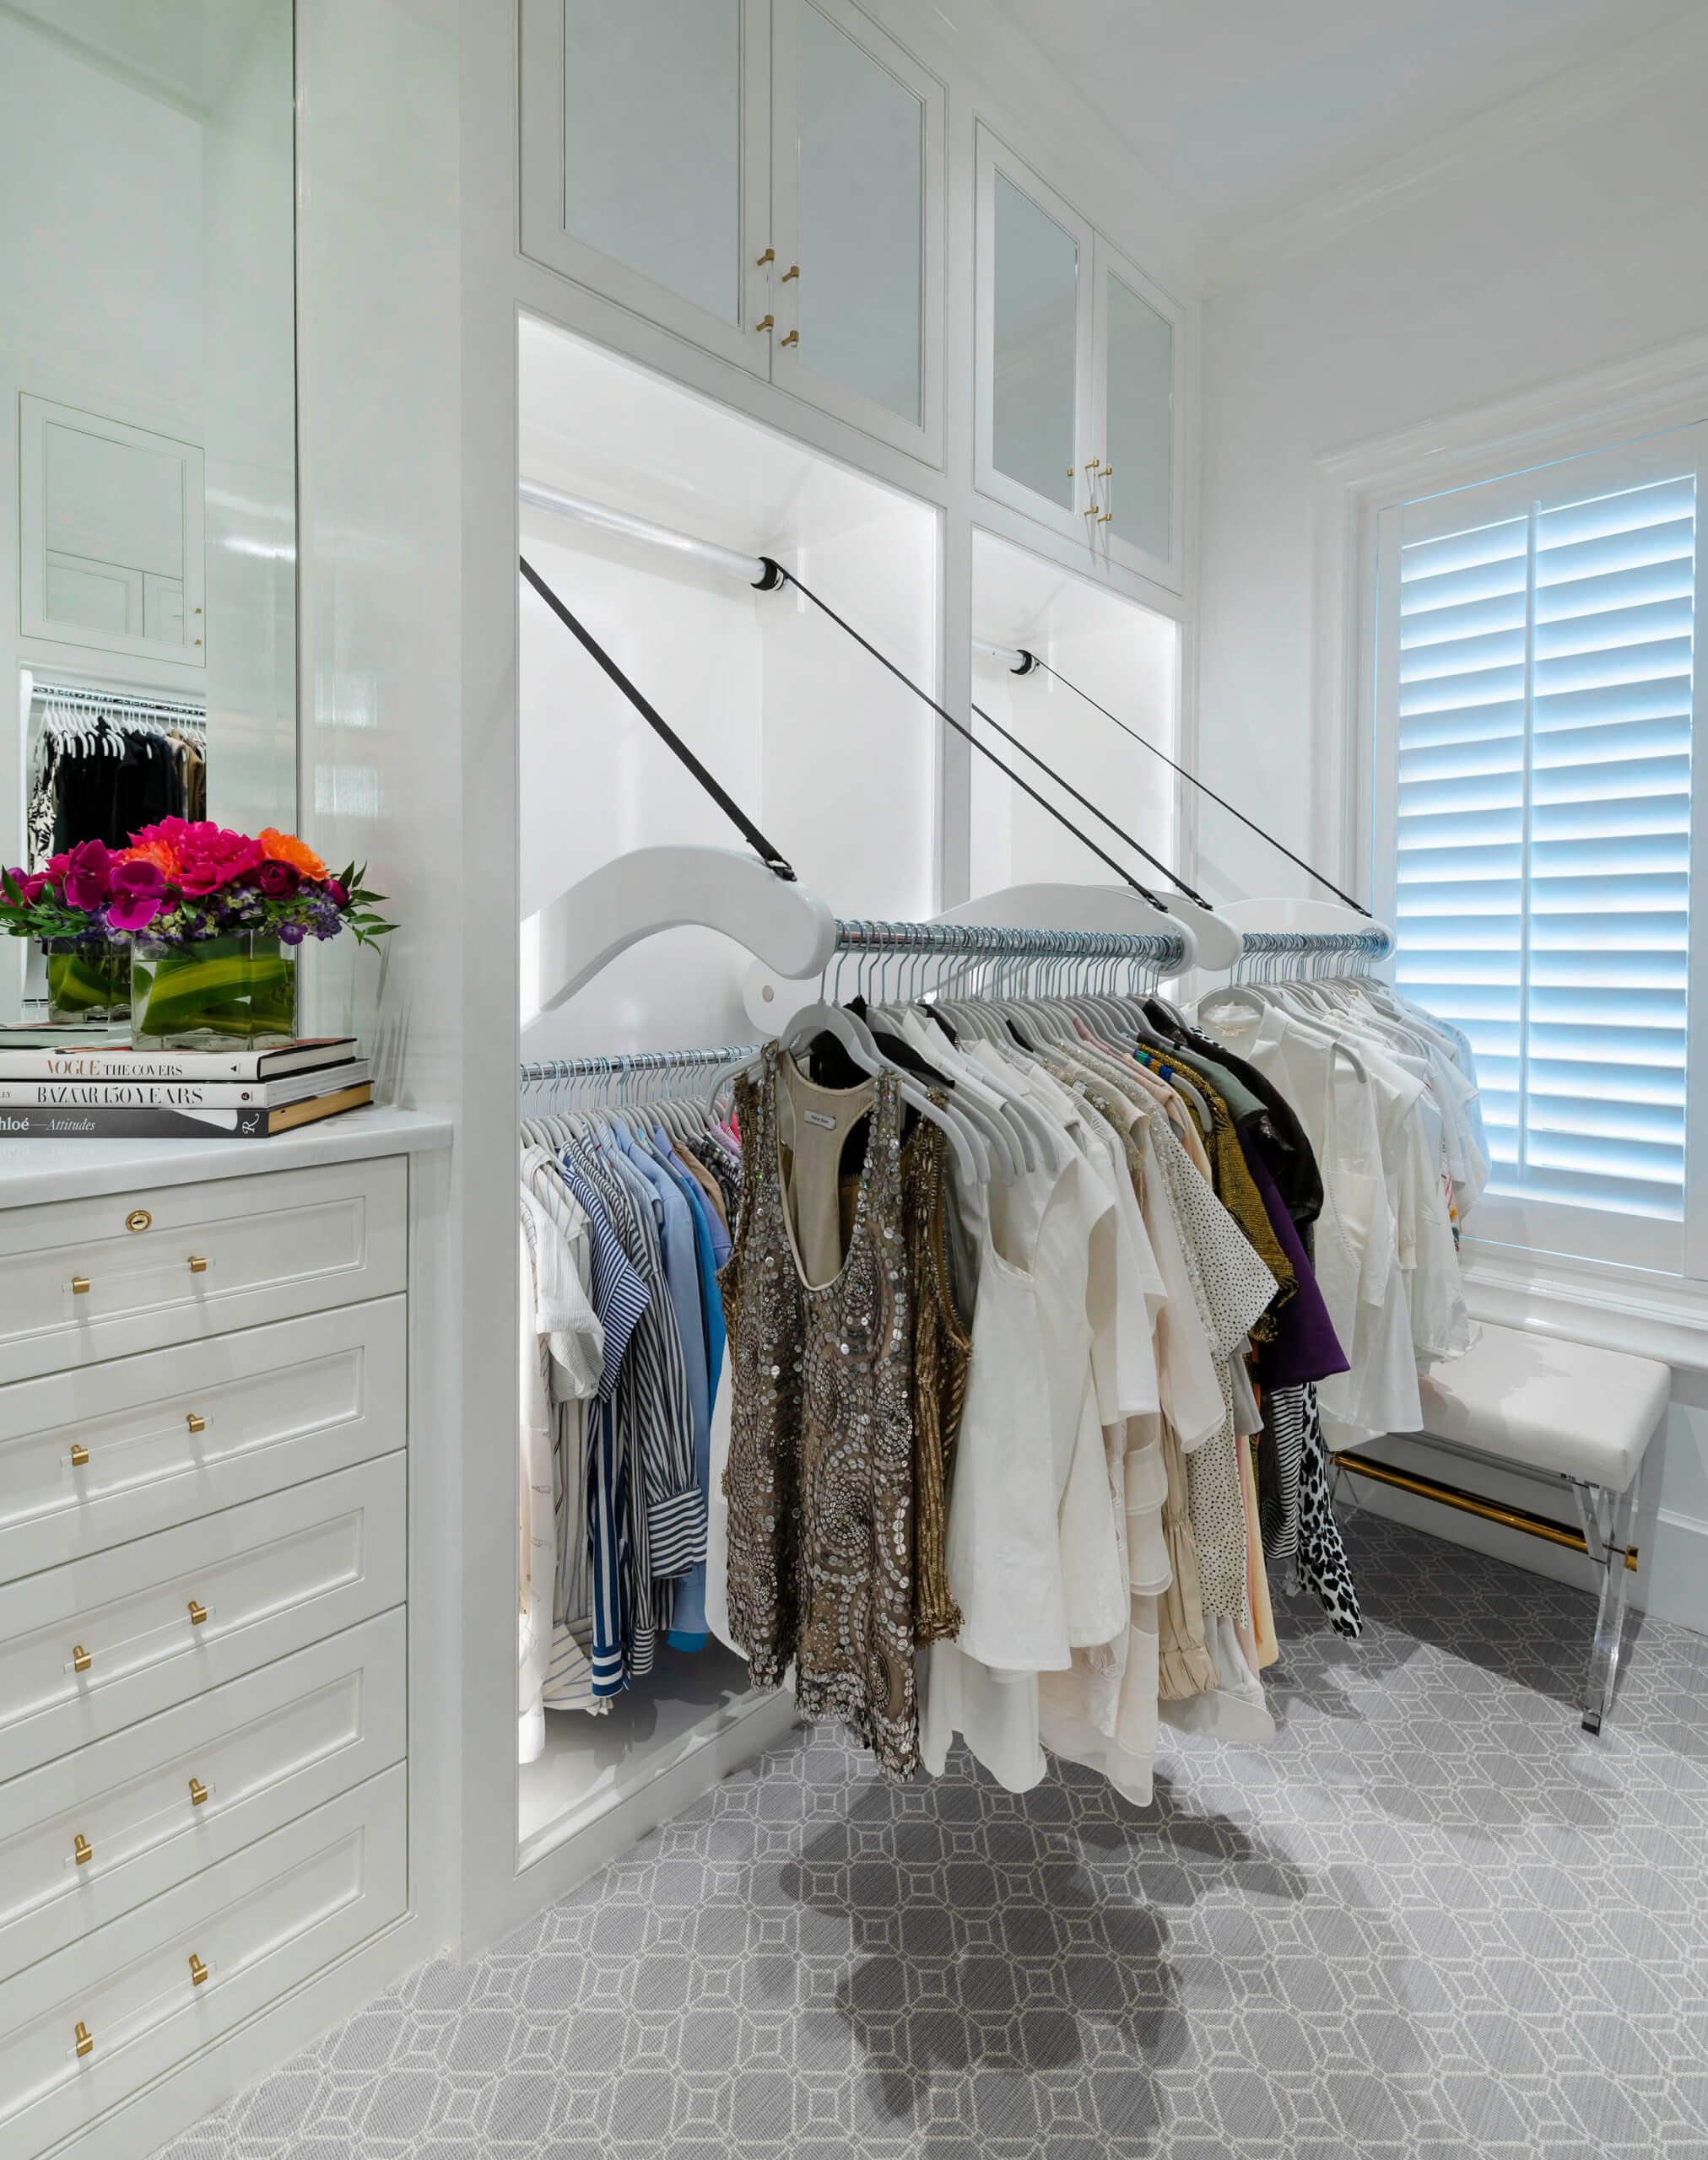 Bedroom Closet 18 - Transform Your Bedroom with These Stylish Closet Ideas